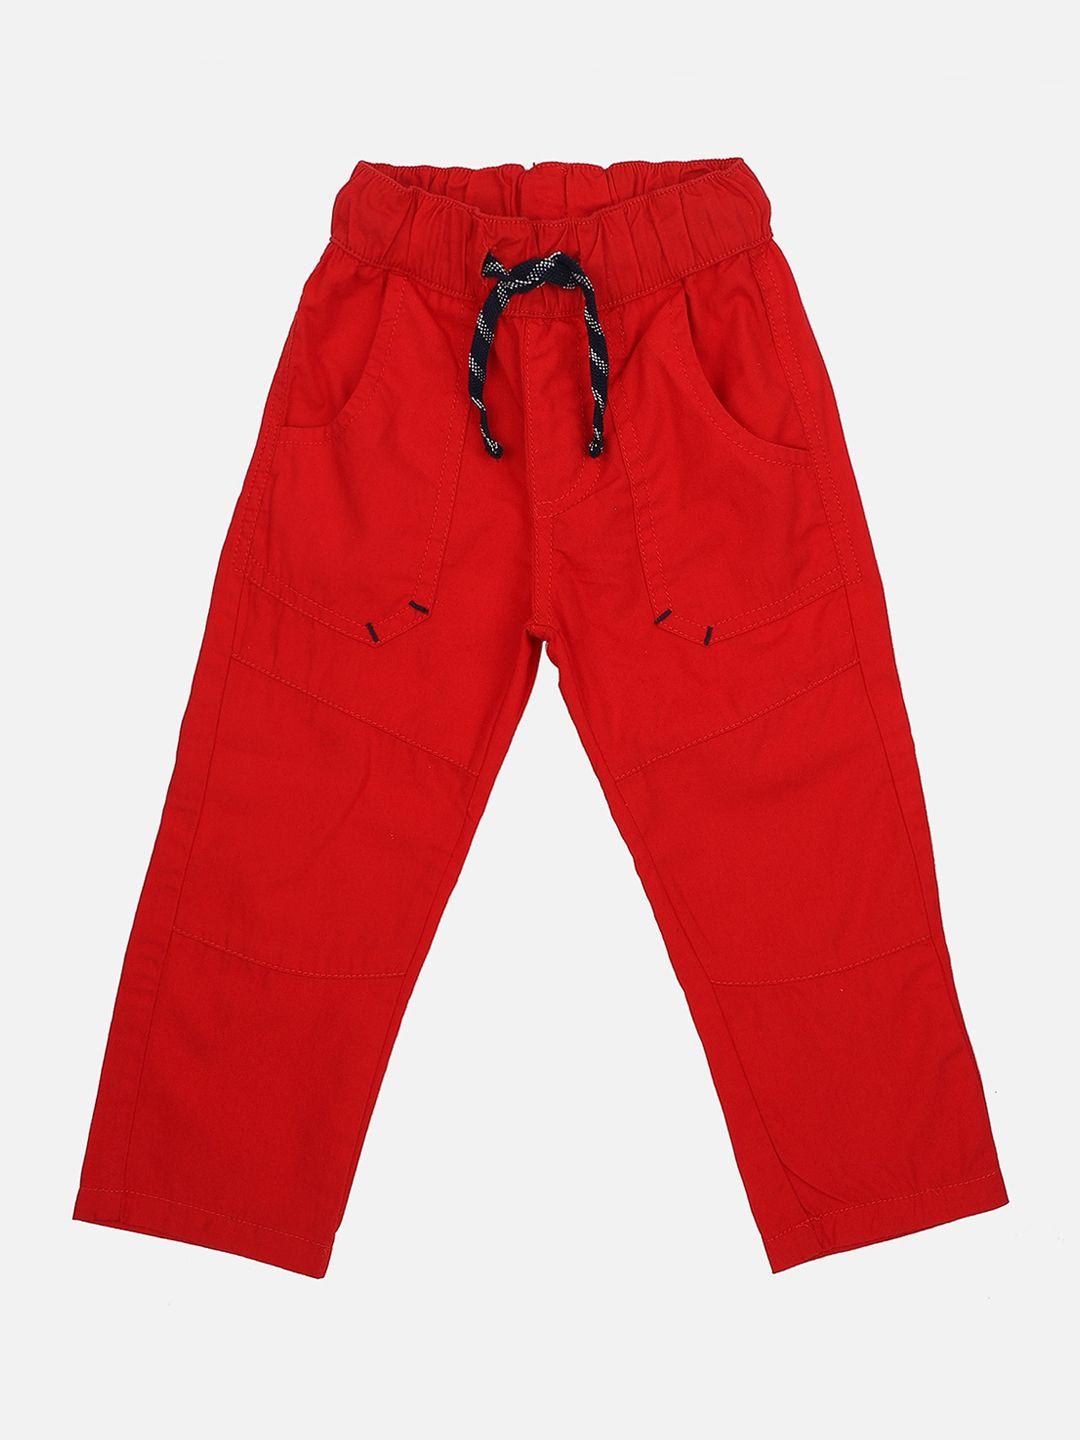 Bodycare Kids Boys Red Cotton Trousers